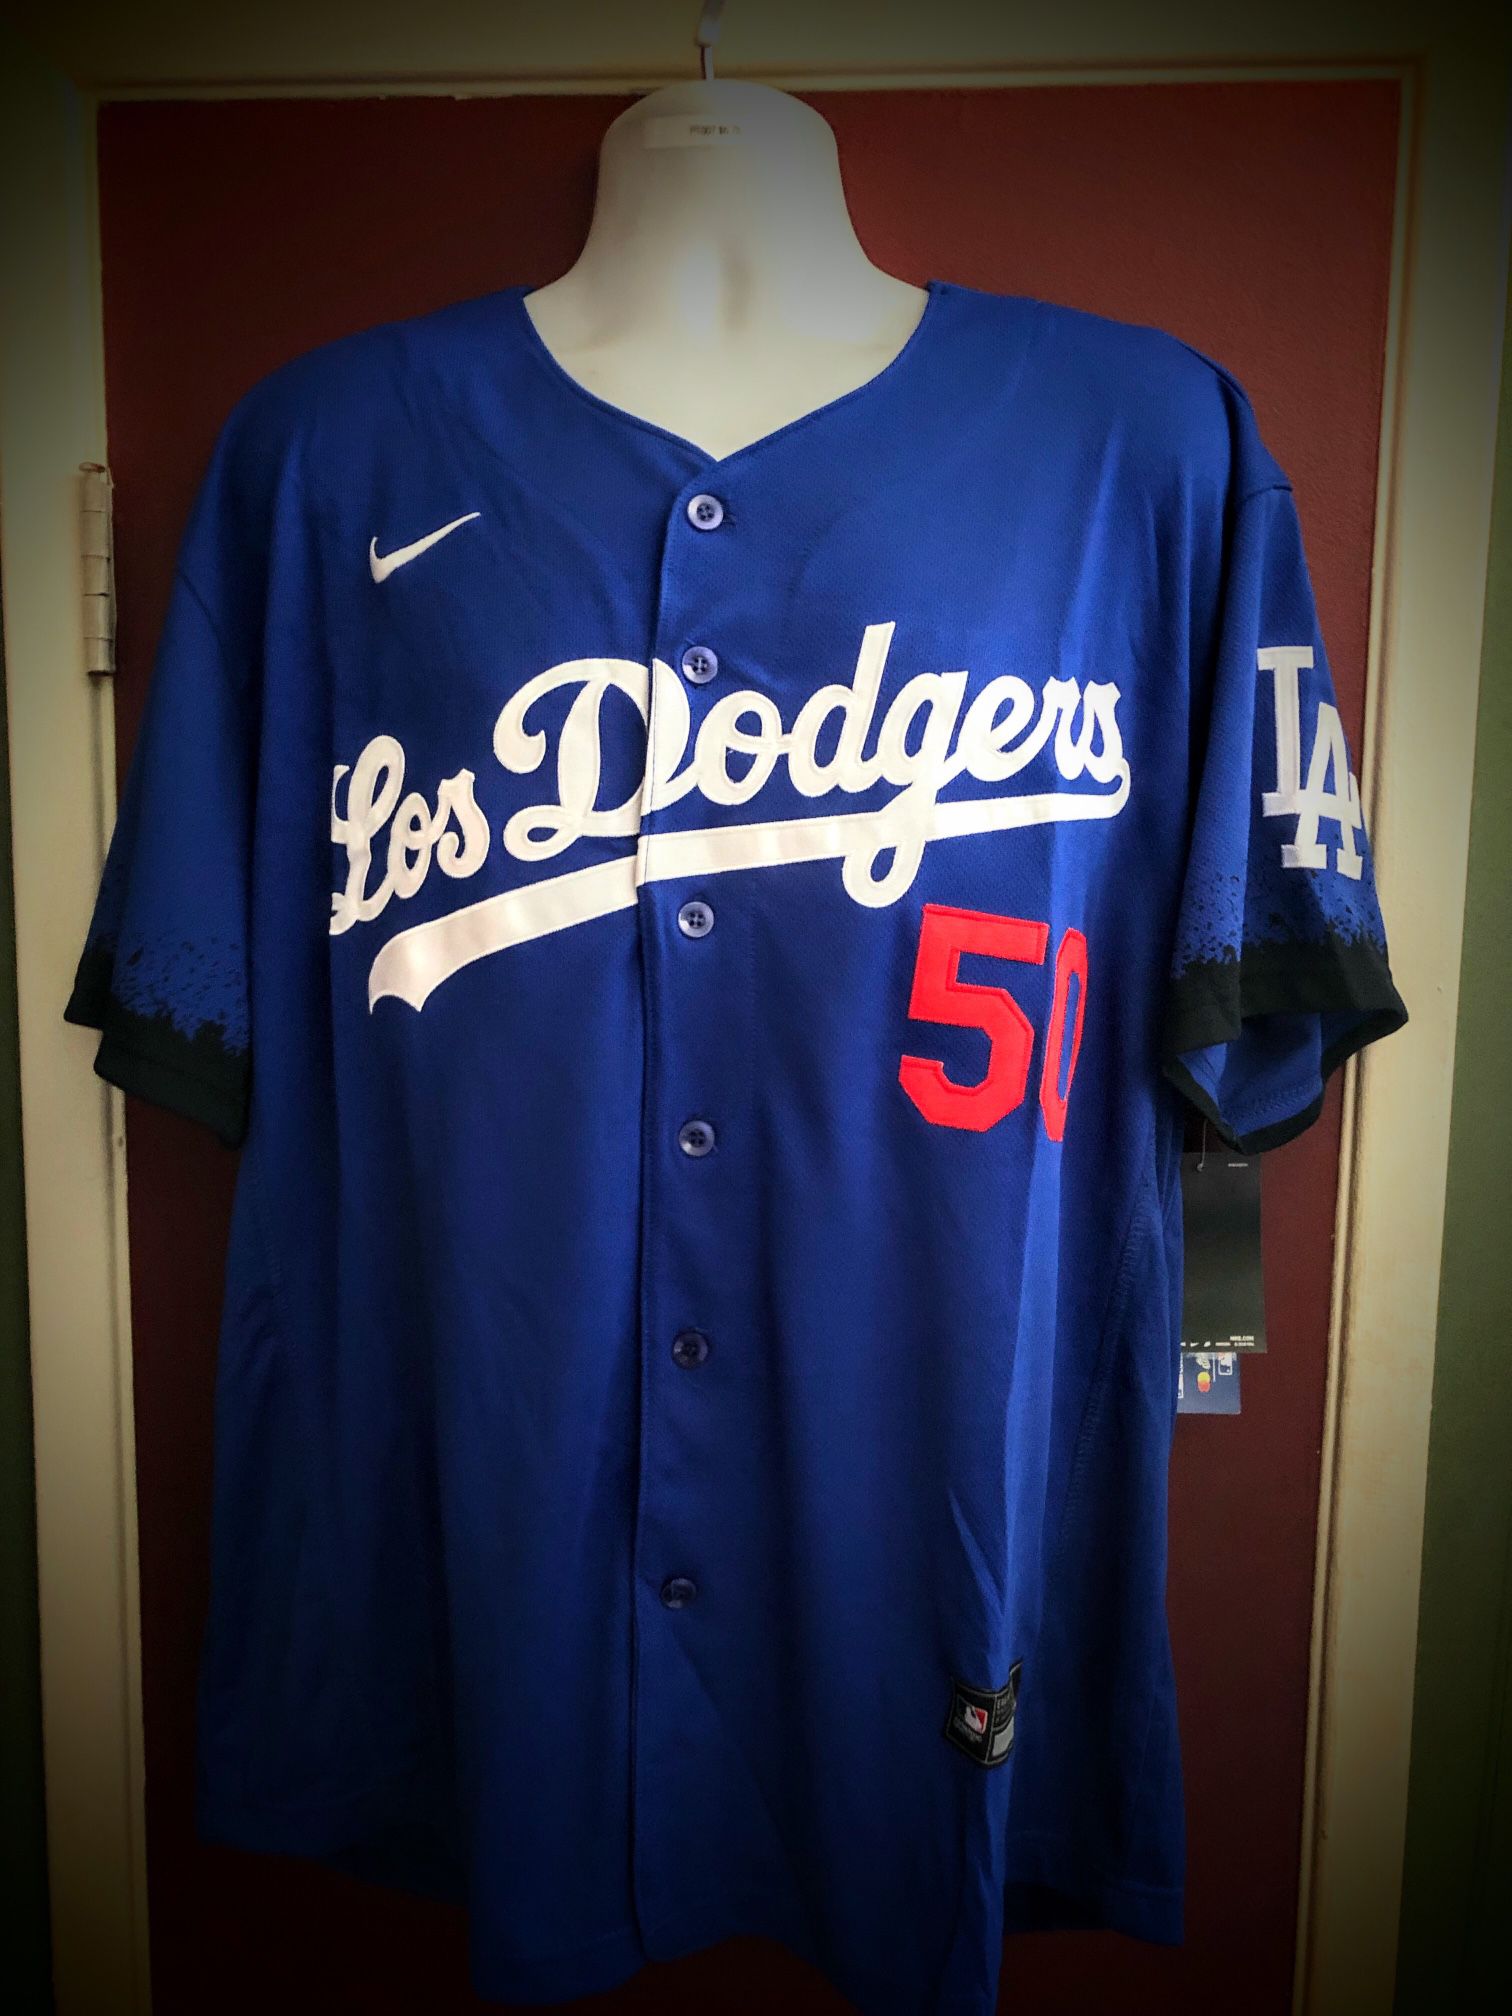 Los Angeles Dodgers #50 Mookie Betts MLB Jersey - M.L.XL.2X.3X for Sale in  Redondo Beach, CA - OfferUp